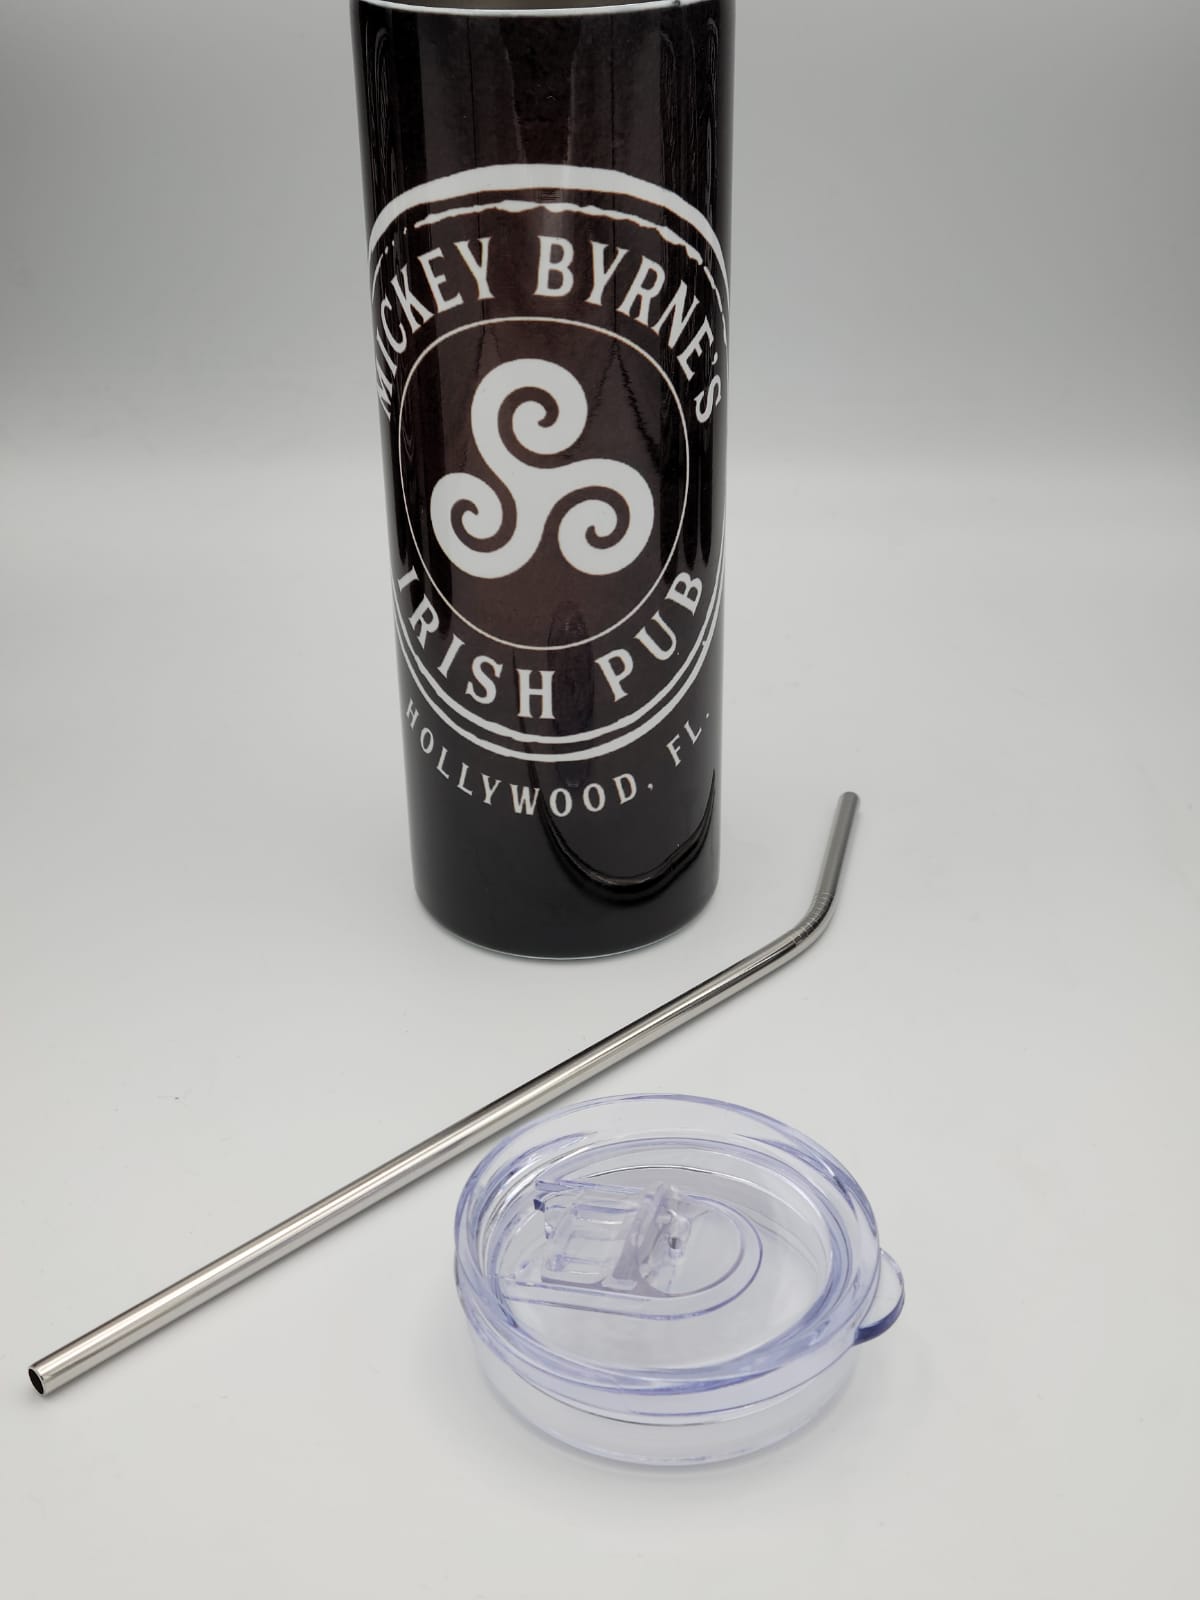 Personalized Mickey Byrne's 20 Ounce Stainless Steel Logo Tumbler with Lid and Metal Straw